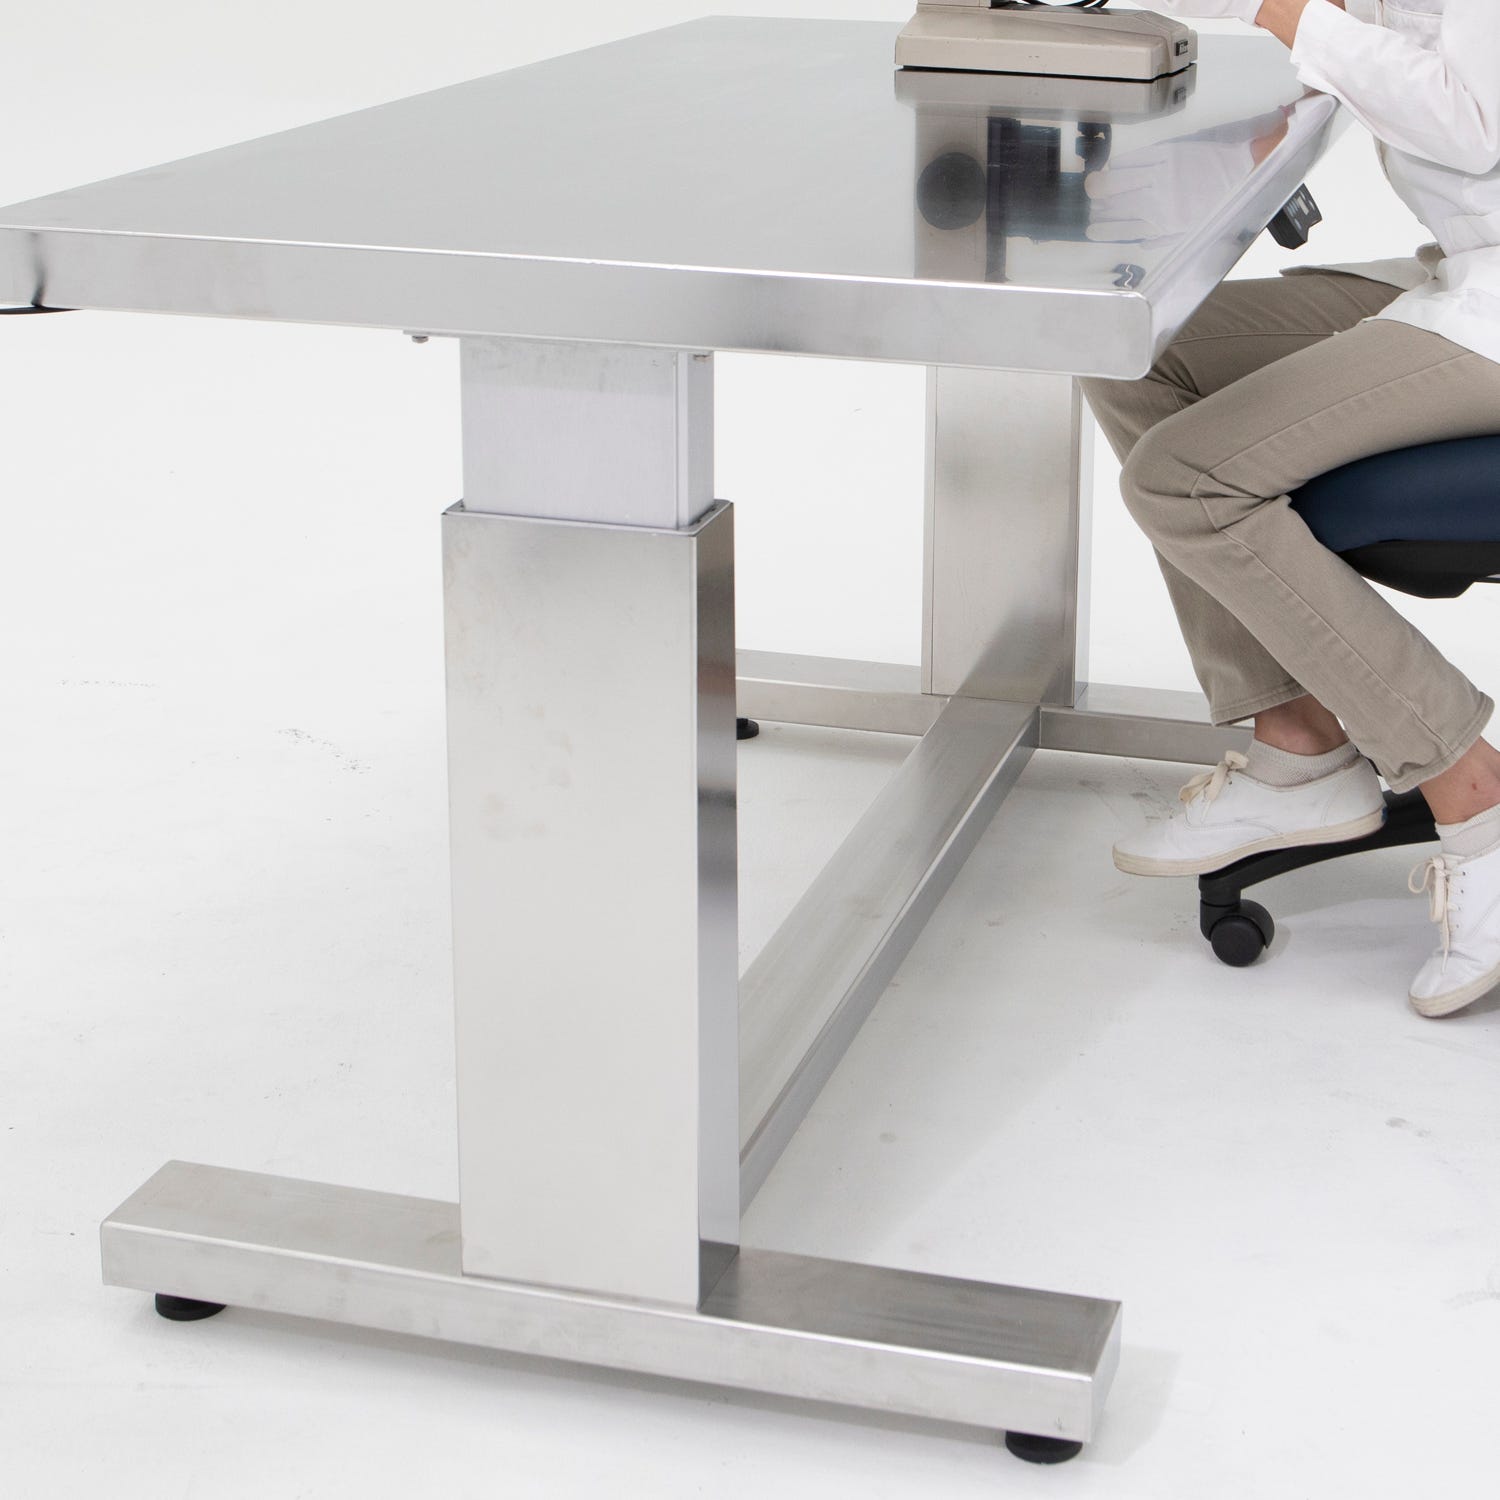 Reinforced Frame of ErgoHeight™ Adjustable-Height Cleanroom Table